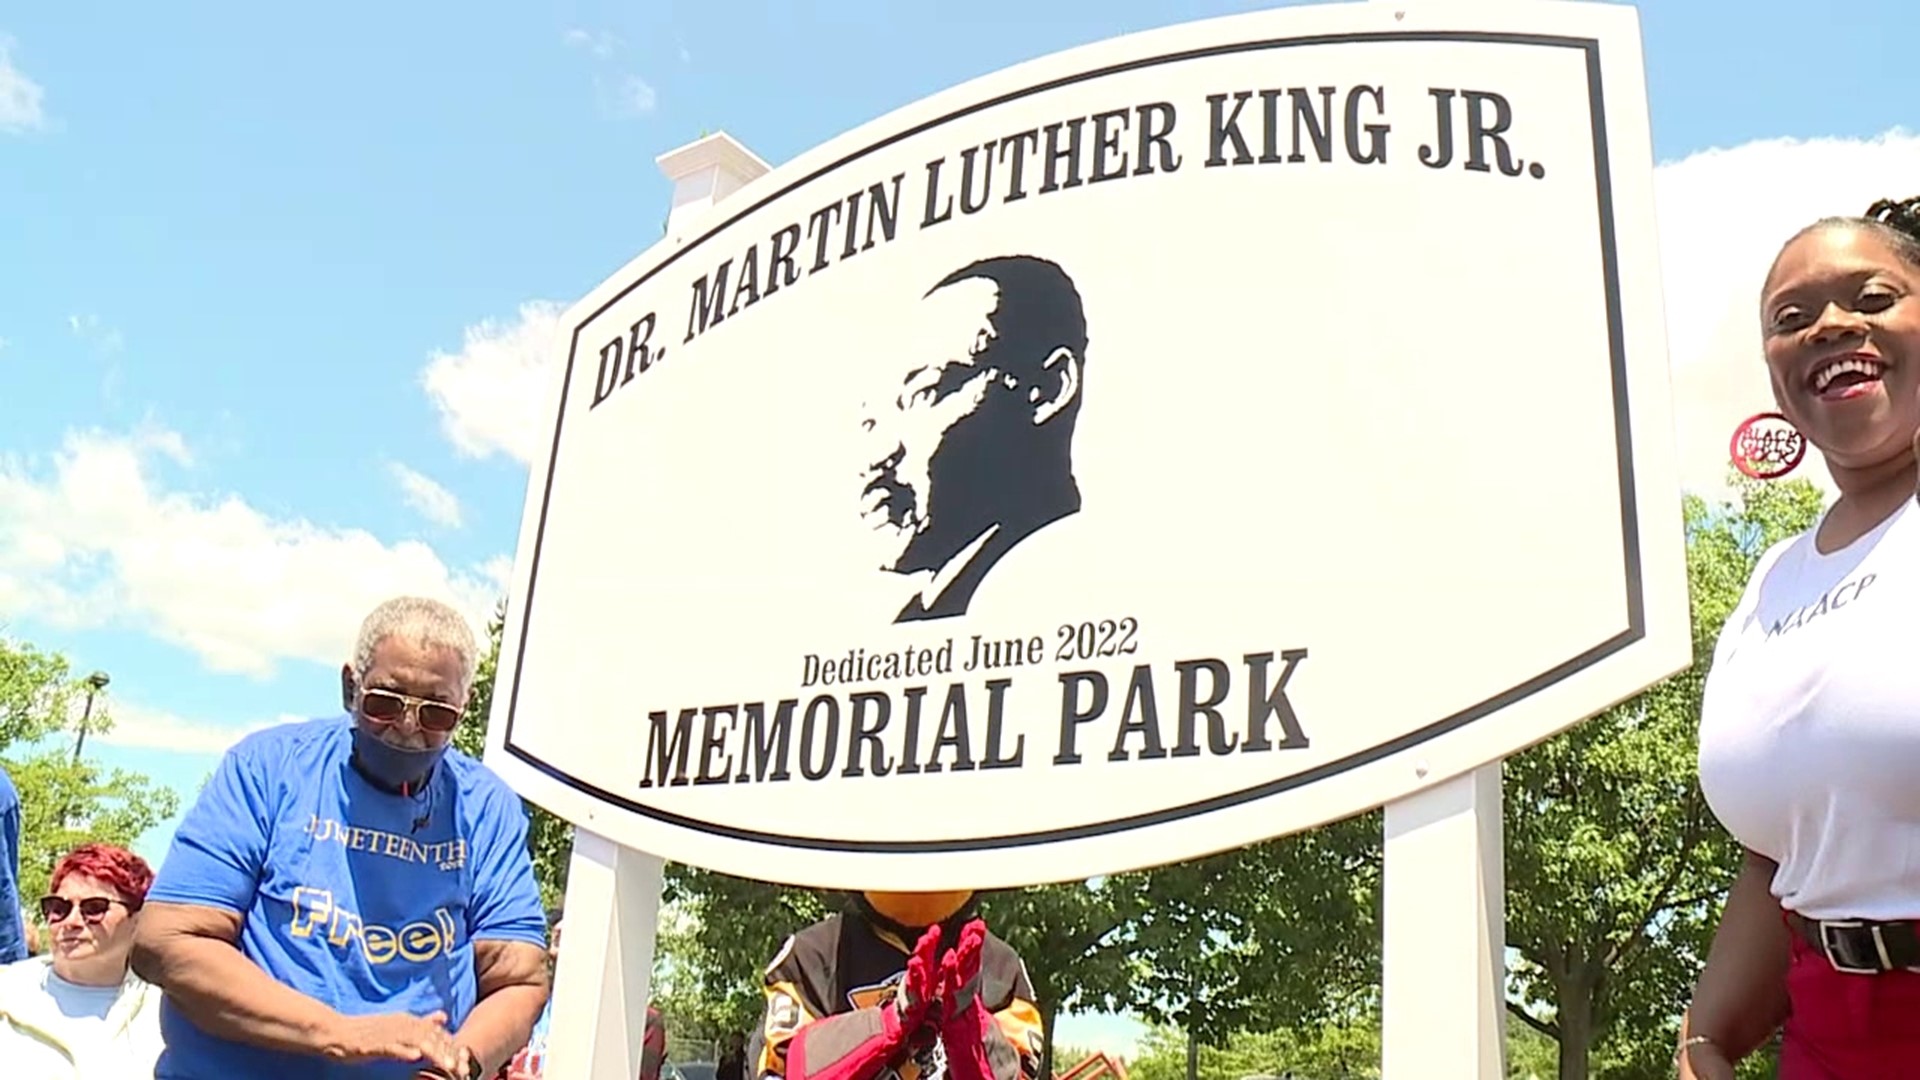 The Diamond City celebrated the holiday with the renaming of a beloved park.